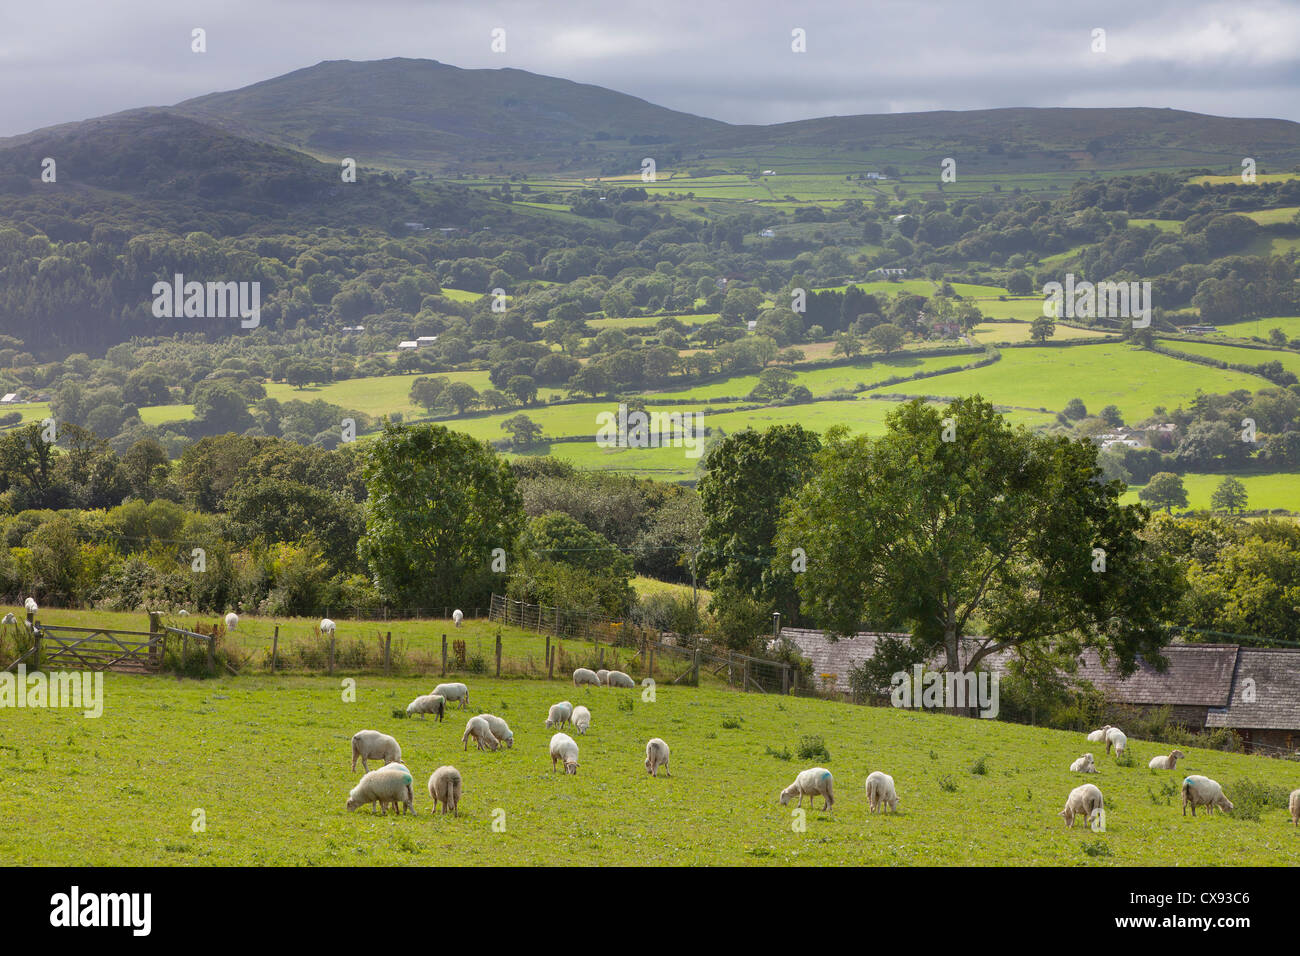 Sheep farming, Conway, North Wales hills. Panoramic view of green pasture land with sheep grazing Stock Photo